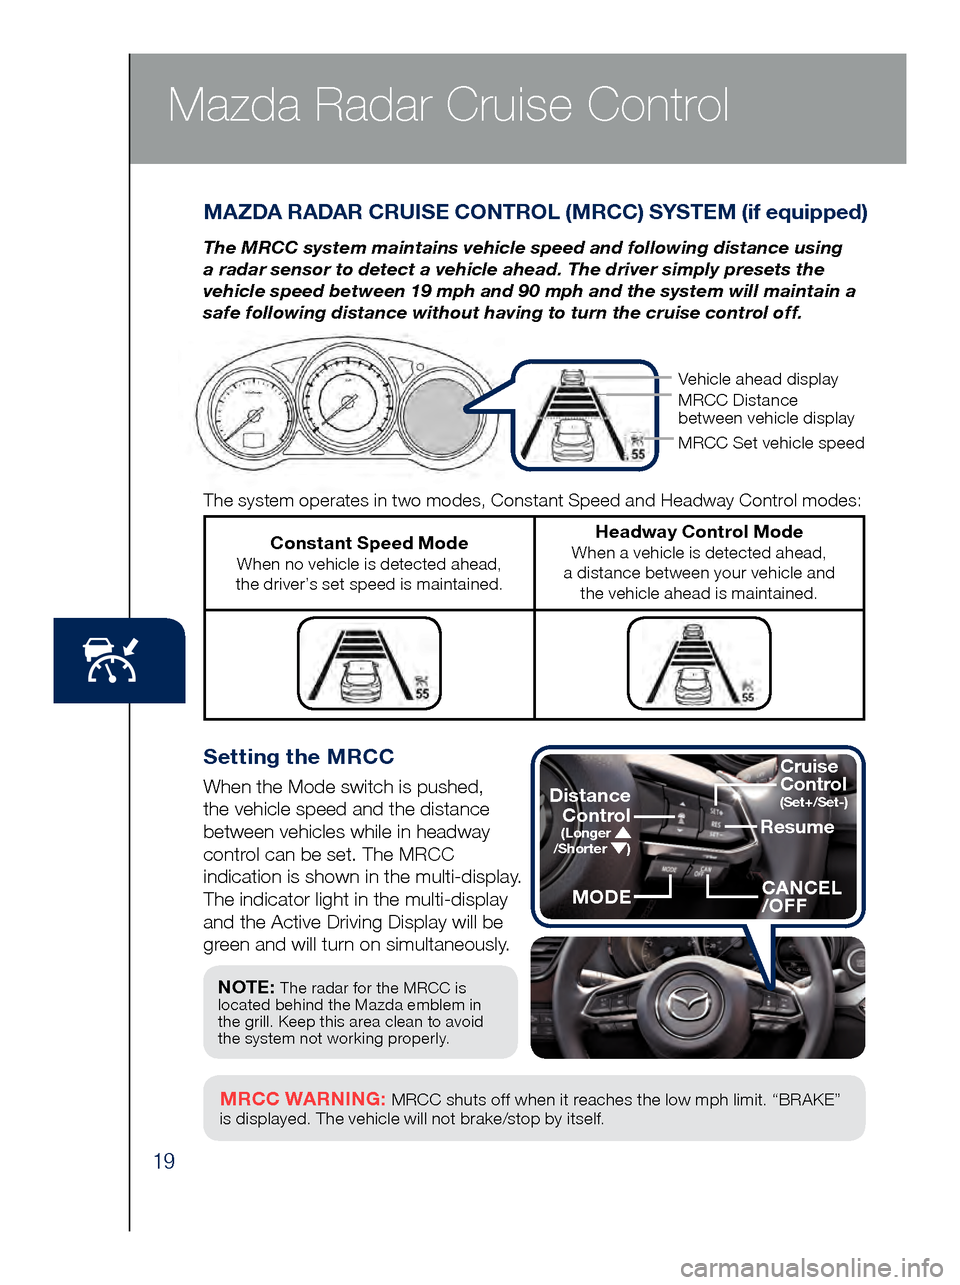 MAZDA MODEL 6 2017  Quick Start Guide (in English) 19
Mazda Radar Cruise Control
Setting the MRCC
When the Mode switch is pushed, 
the vehicle speed and the distance 
between vehicles while in headway 
control can be set. The MRCC 
indication is shown